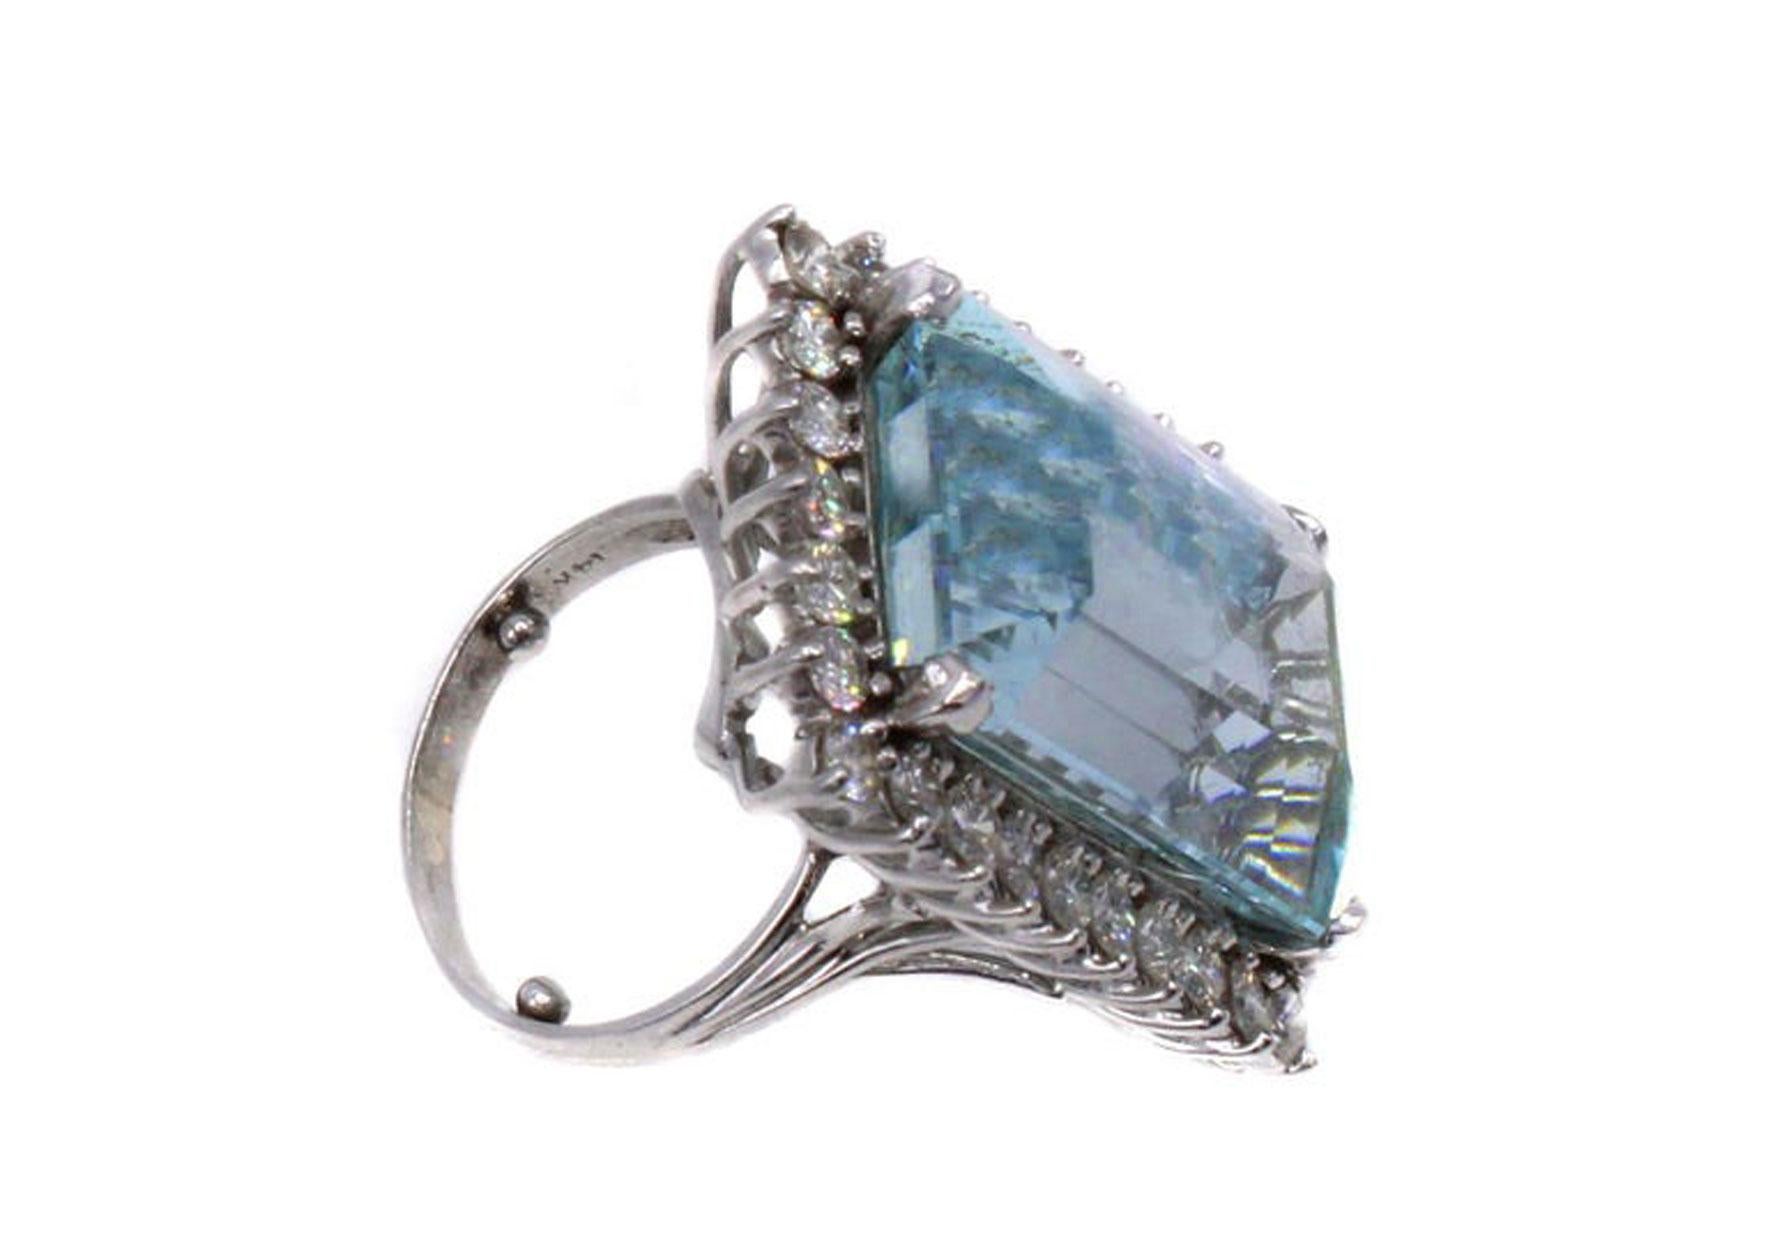 This bold 1970s ring features an elongated emerald cut Aquamarine measured to weigh approximately 35 carats. The hand-crafted platinum mounting has 30 bright white and sparkly round brilliant cut diamonds surrounding the center gem. Perfectly